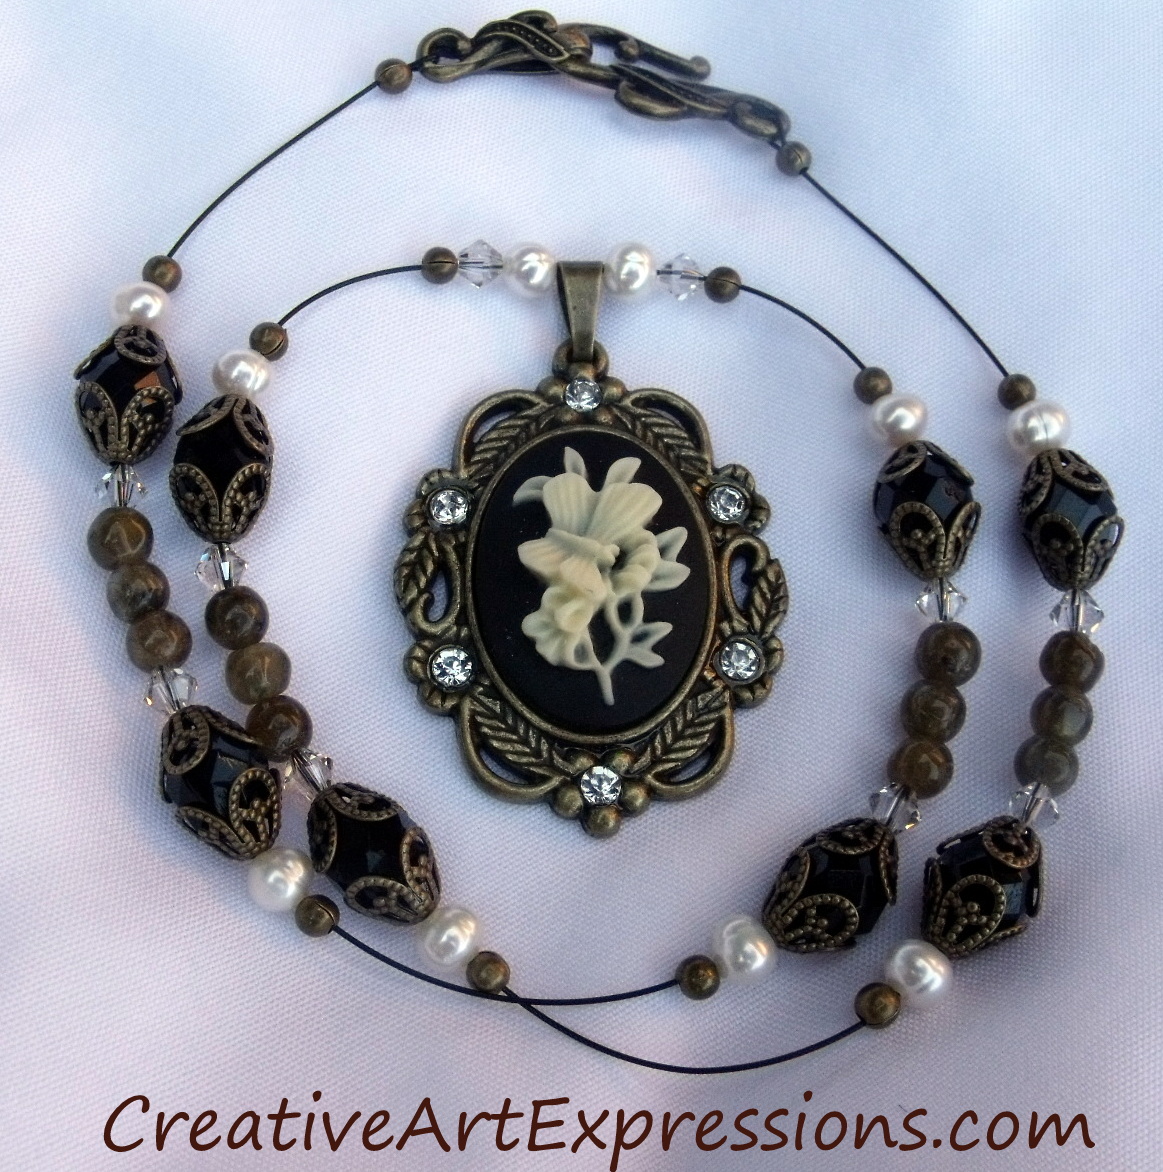 Creative Art Expressions Handmade Black White & Antique Gold Necklace Jewelry Design